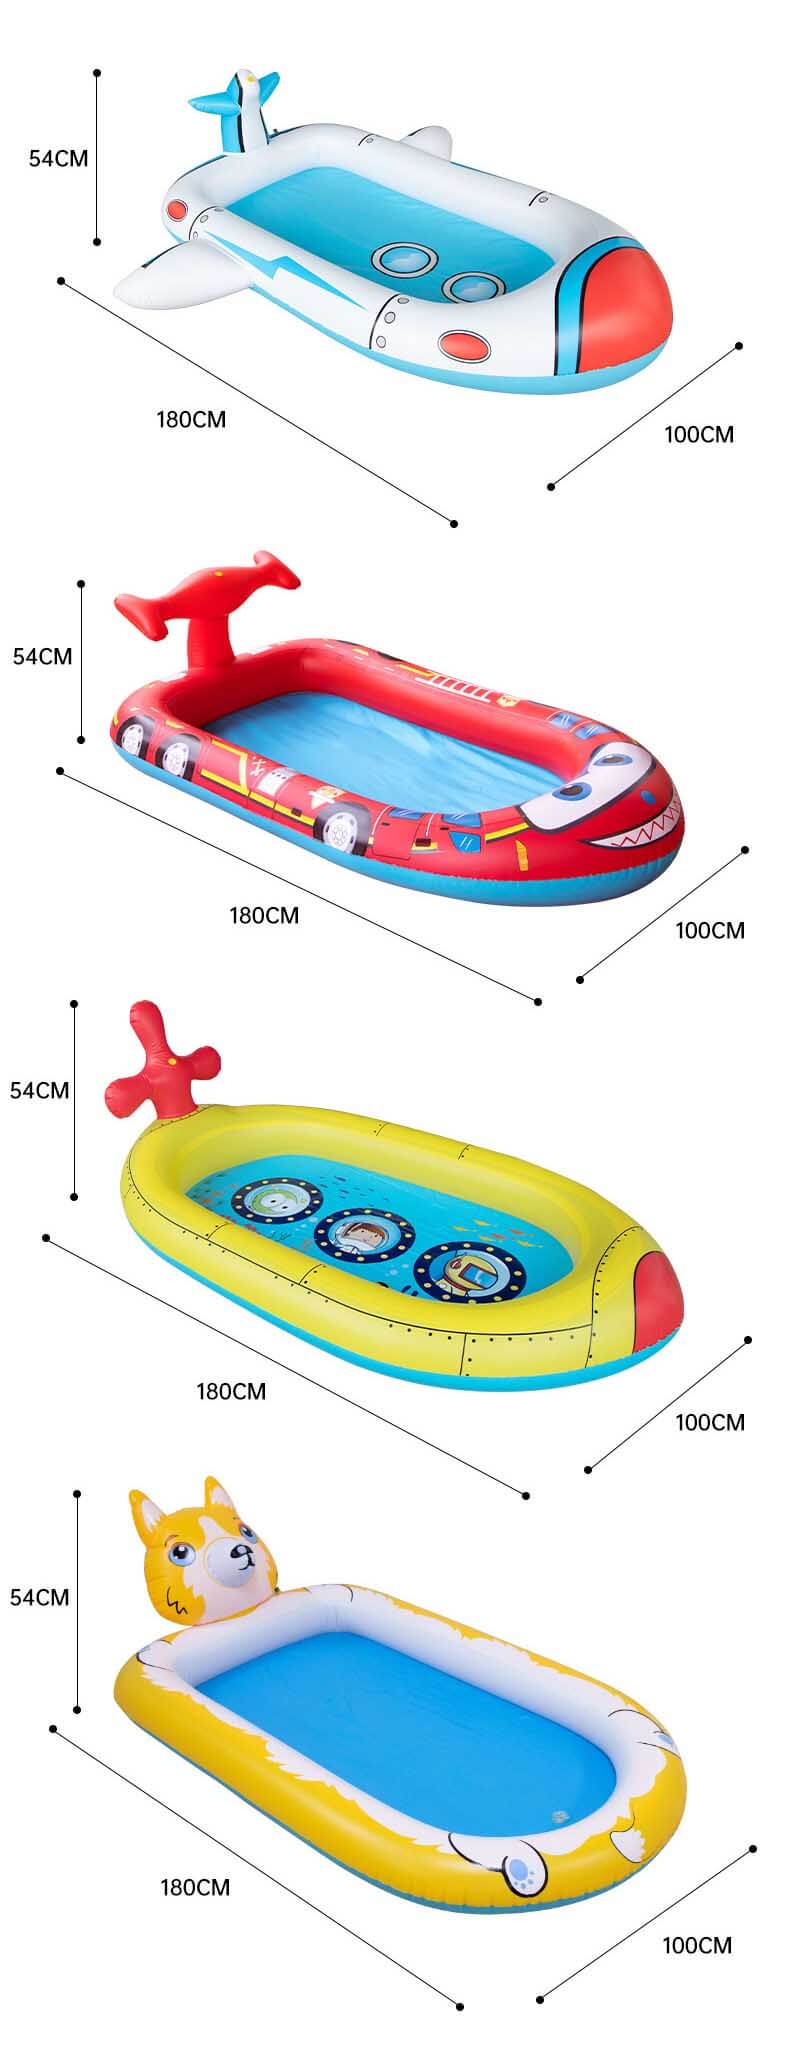 Splash Pad Inflatable Pool Sprinkler for Kids Toddler Pool Kiddie Pool Wading Pool Baby Pool Splash Play Mat Outdoor Water Toy for Backyard Outside for Summer | Shinymarch